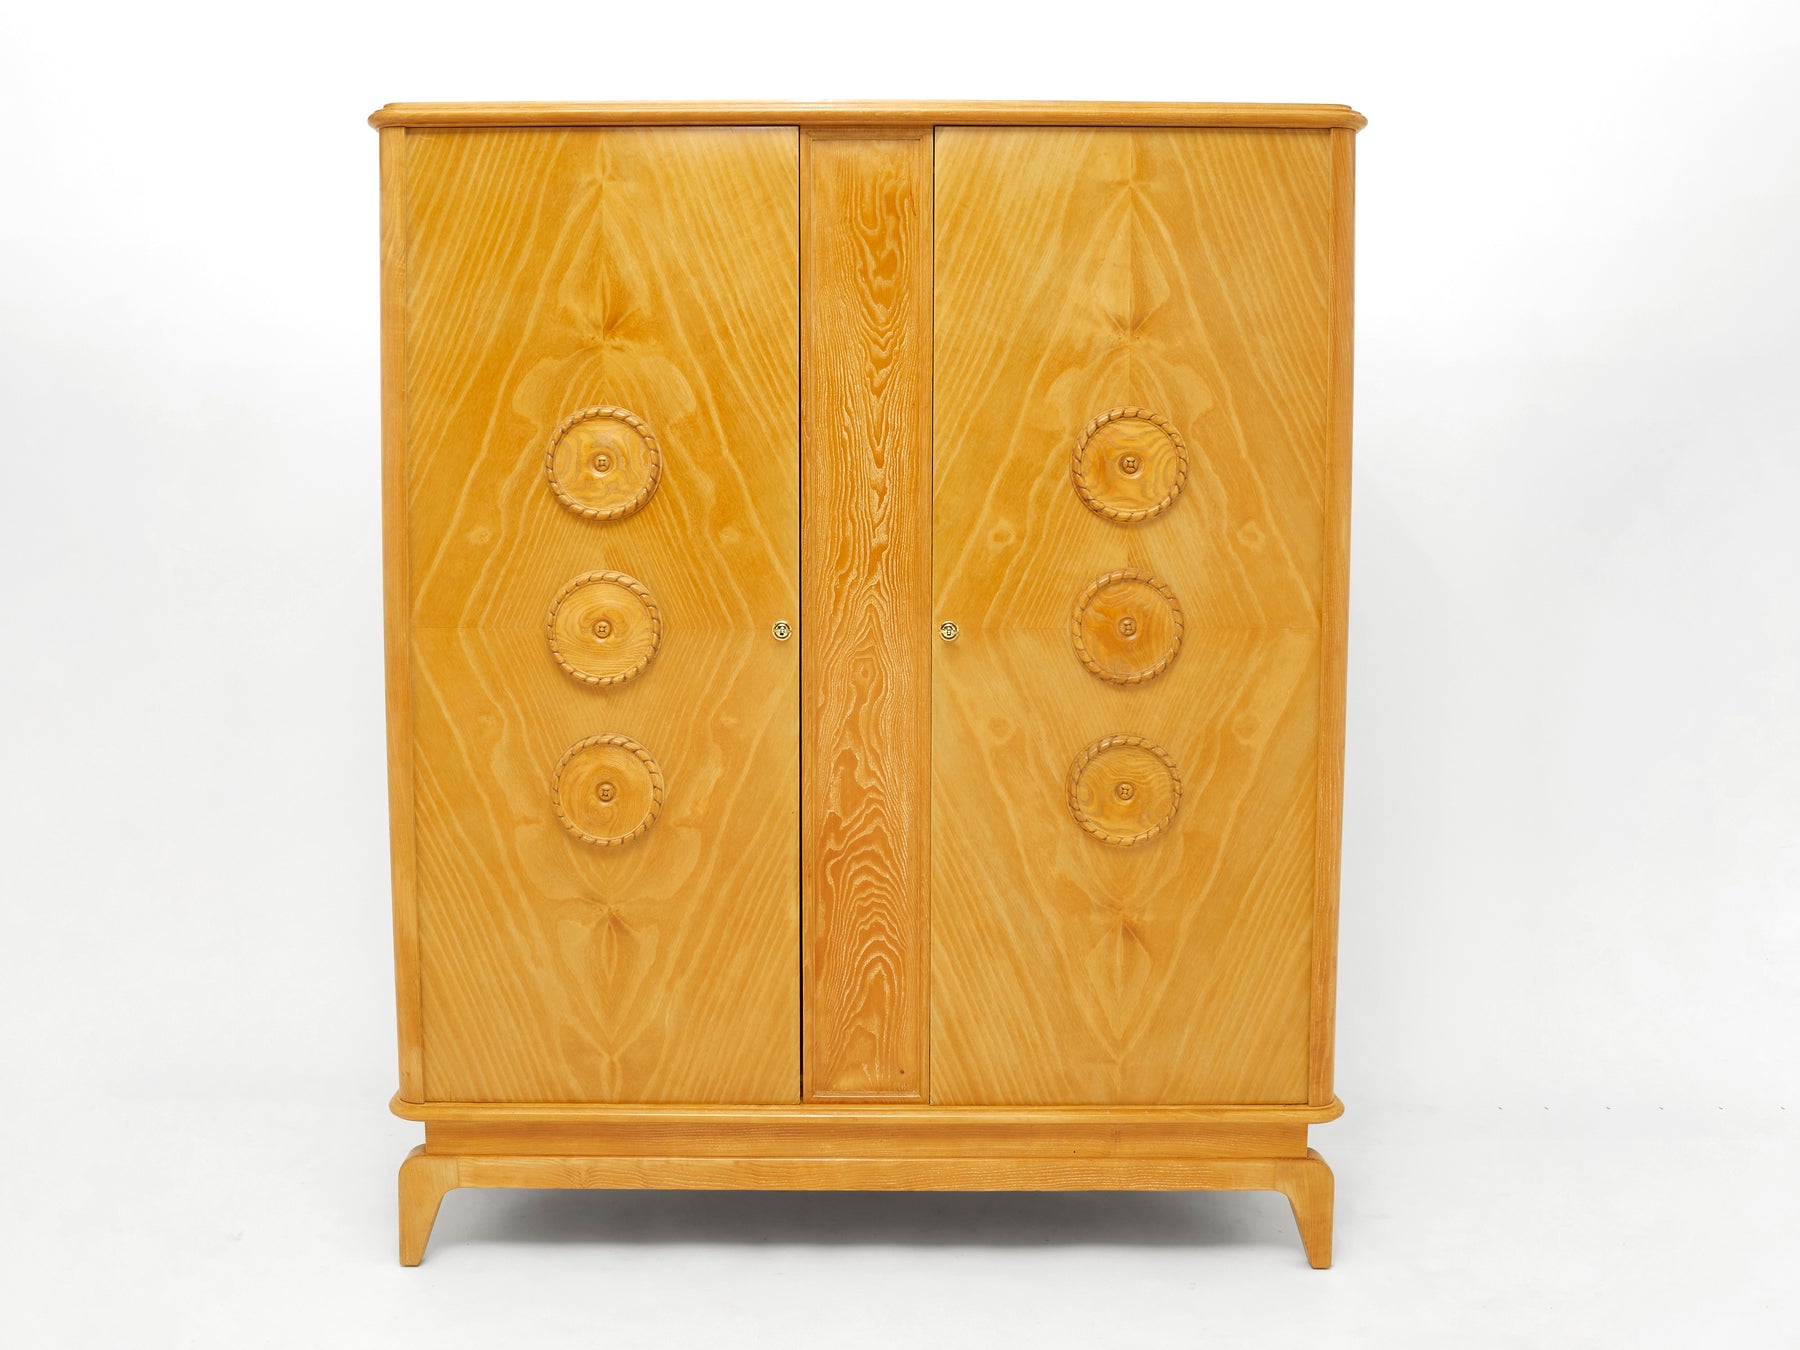 French Art Deco carved ash wood cabinet wardrobe 1950s